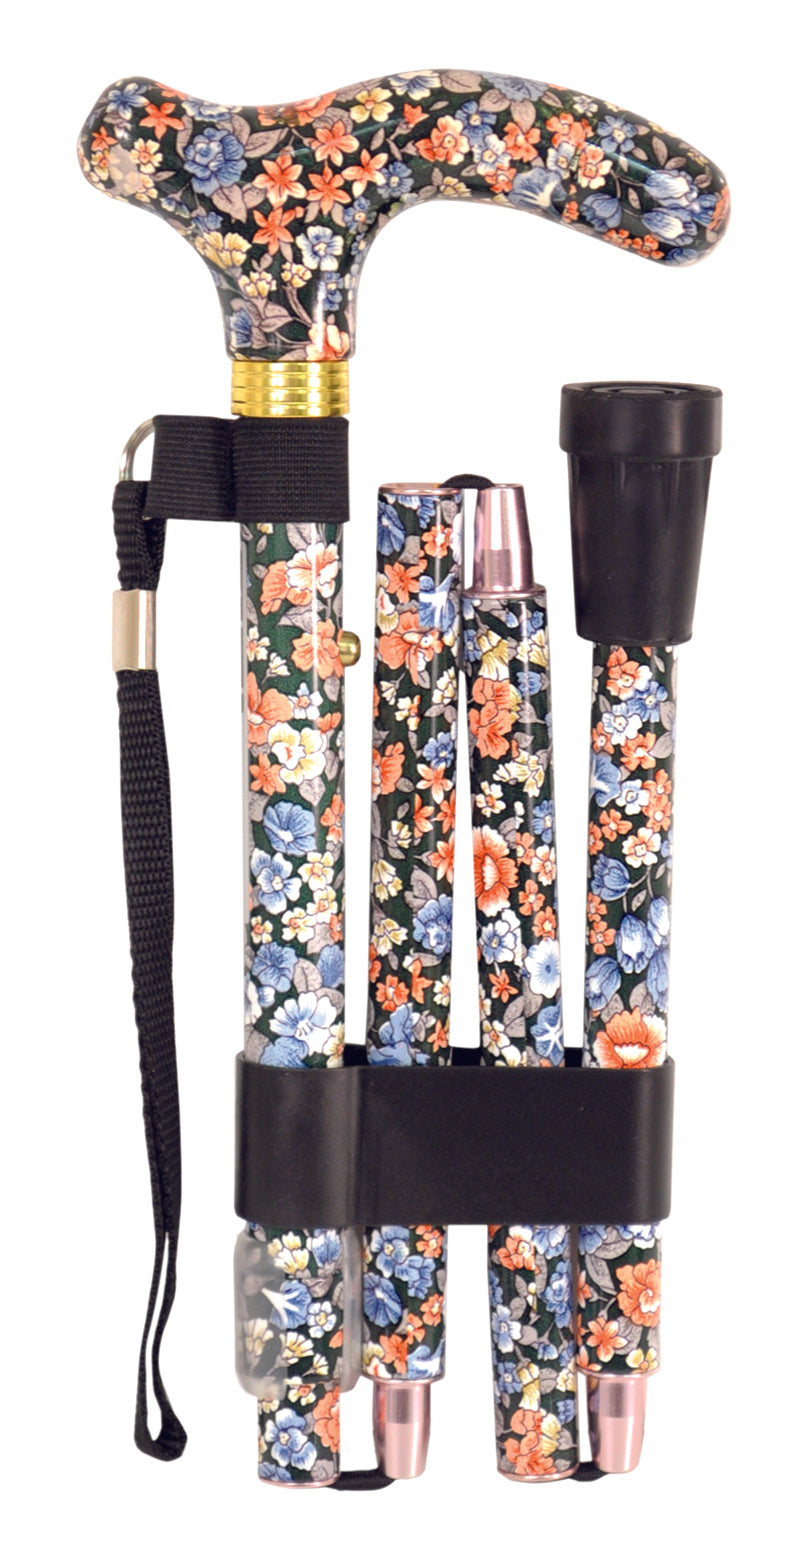 Deluxe Folding Walking Cane Japanese Floral